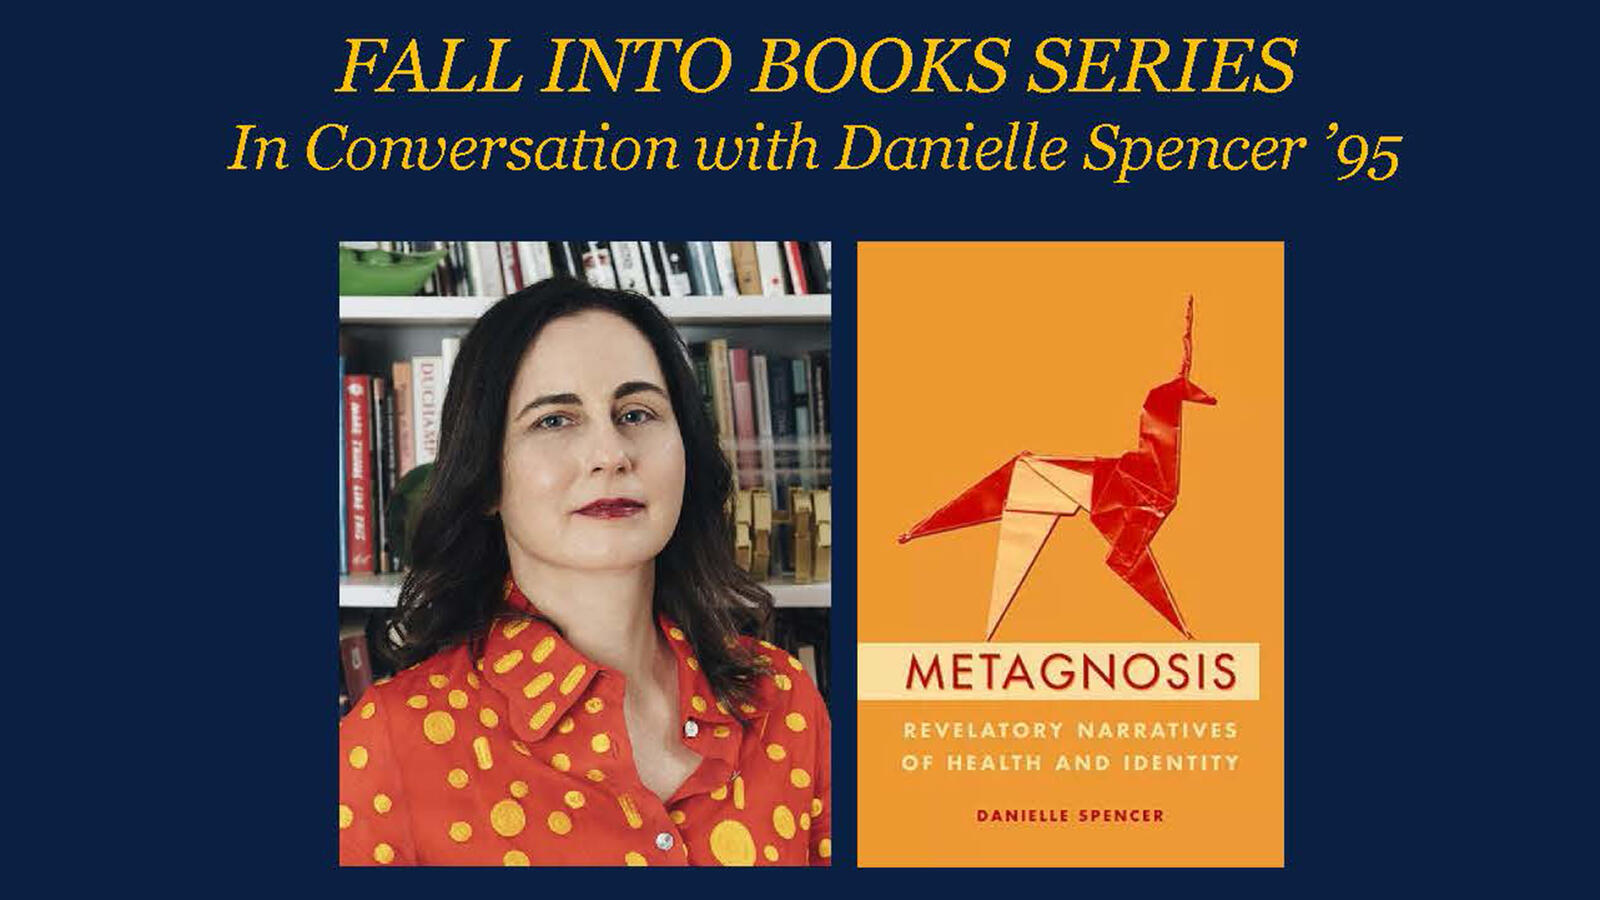 Fall into Books Series: In Conversation with Danielle Spencer ’95